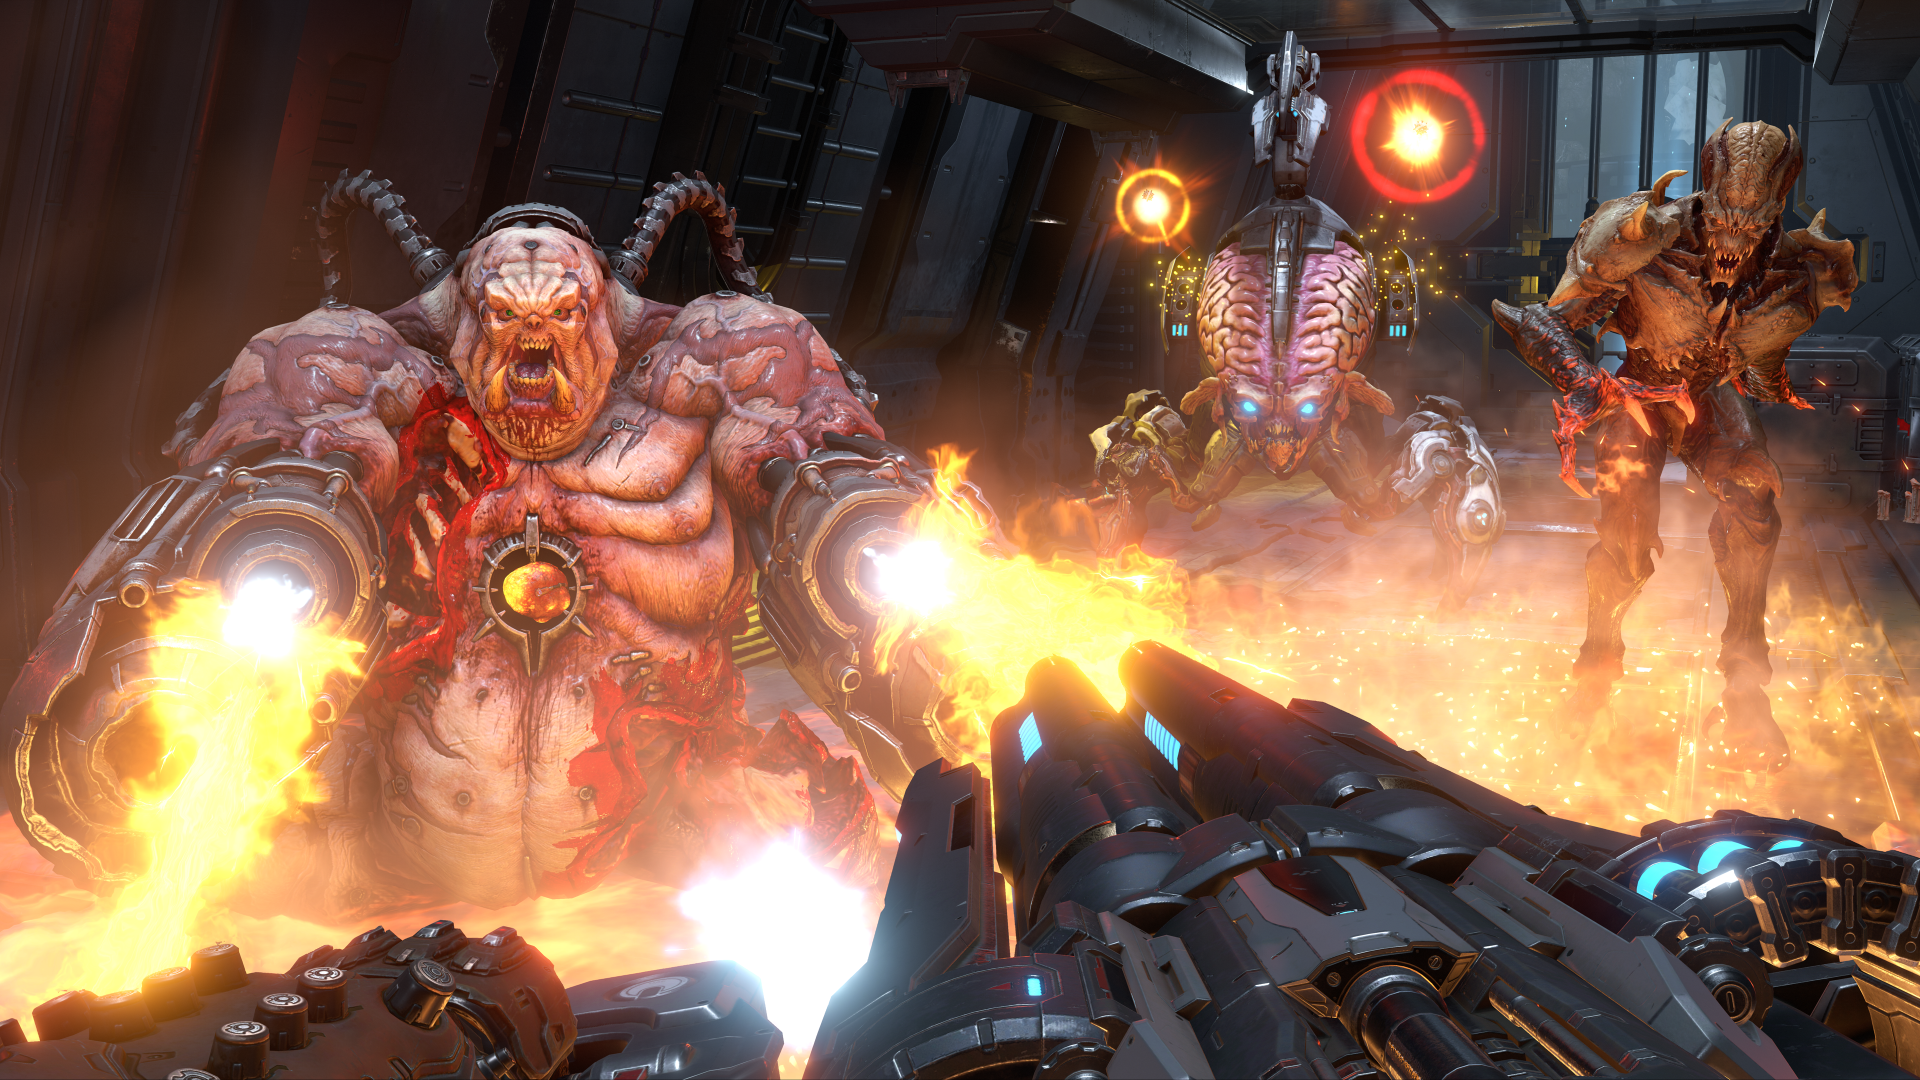 Image for Bethesda didn't want Doom Eternal to include deathmatch "just for the sake of doing it"